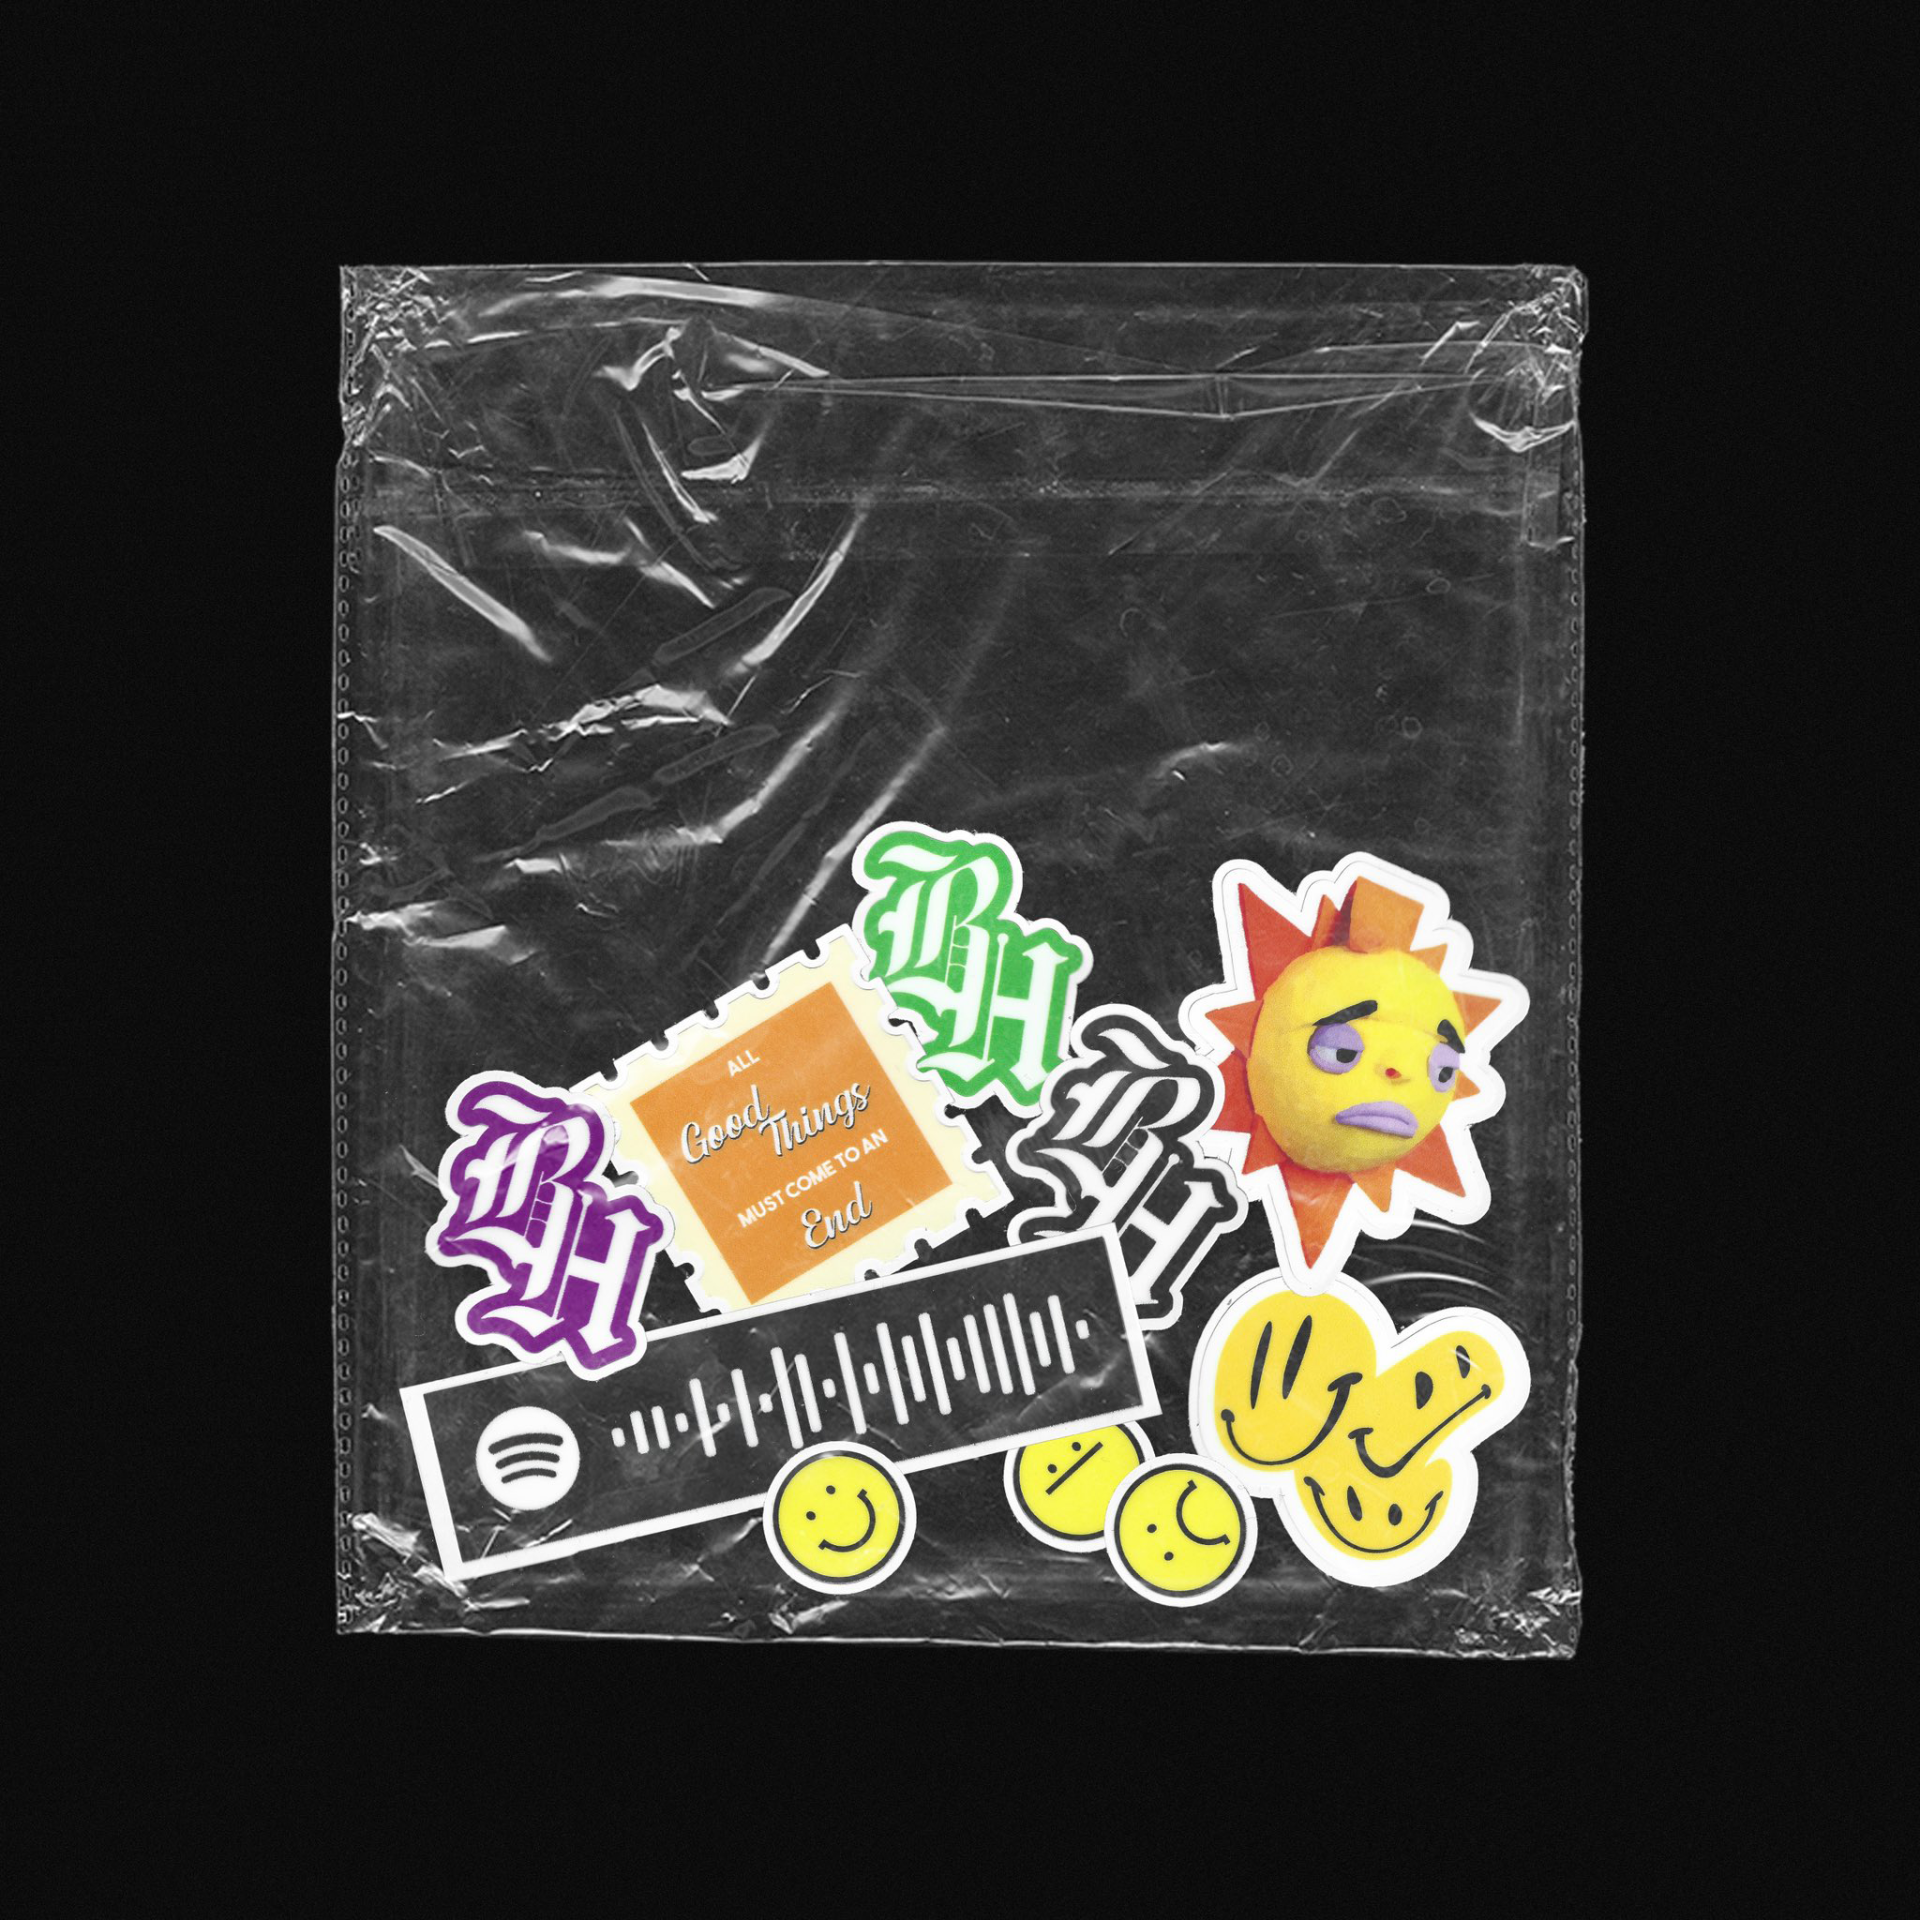 stickers in a bag